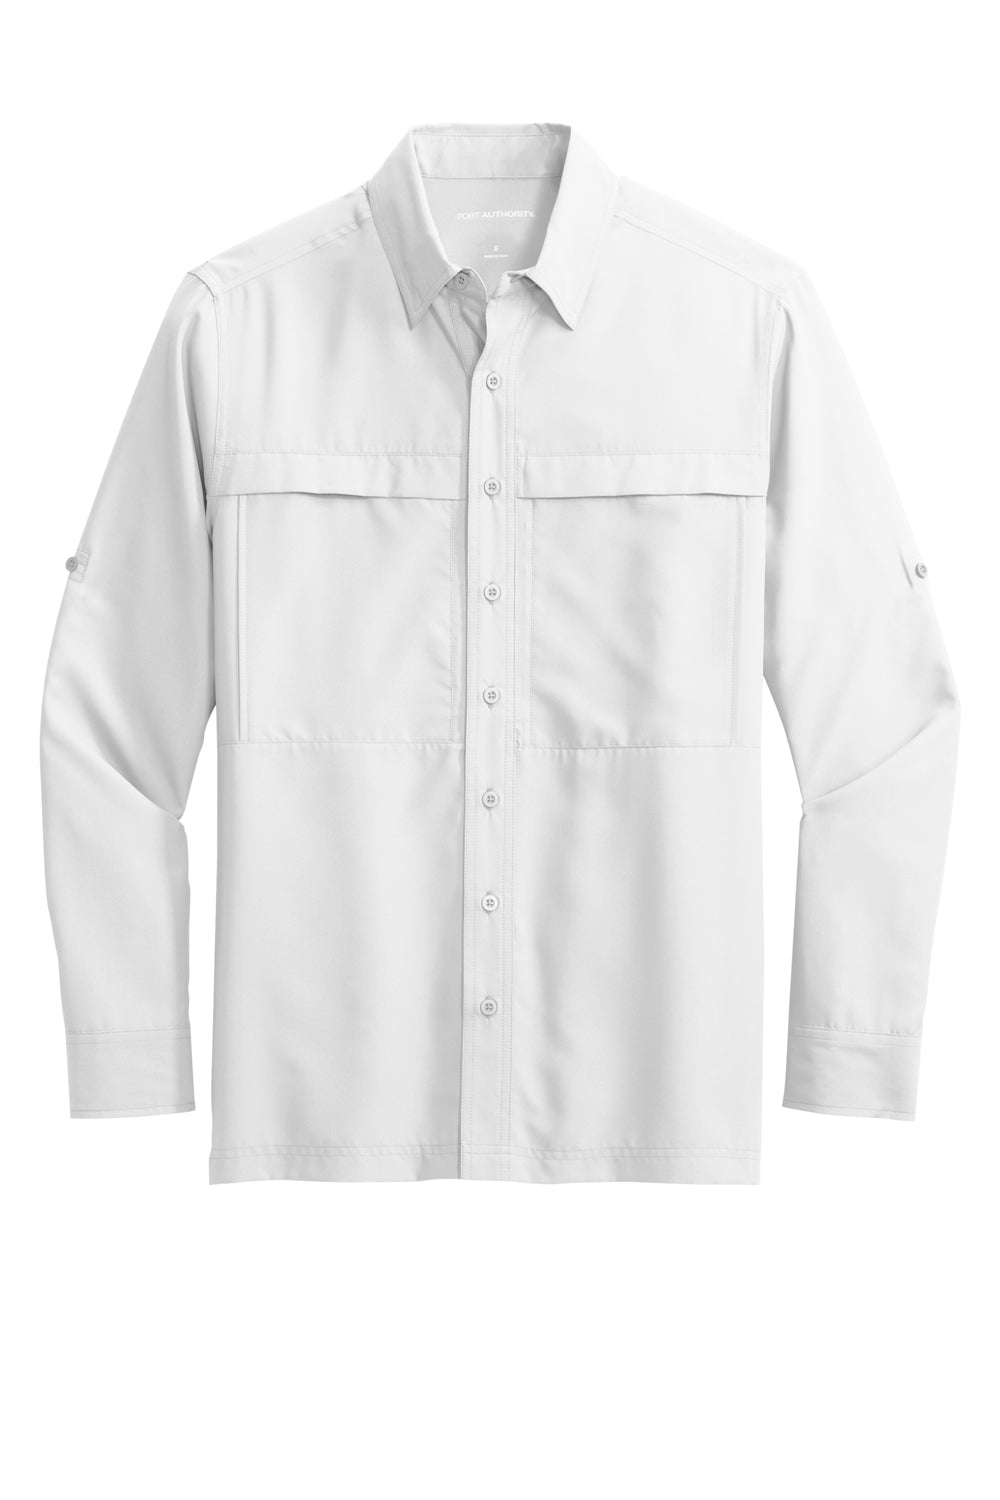 Port Authority W960 UV Daybreak Long Sleeve Button Down Shirt White Flat Front